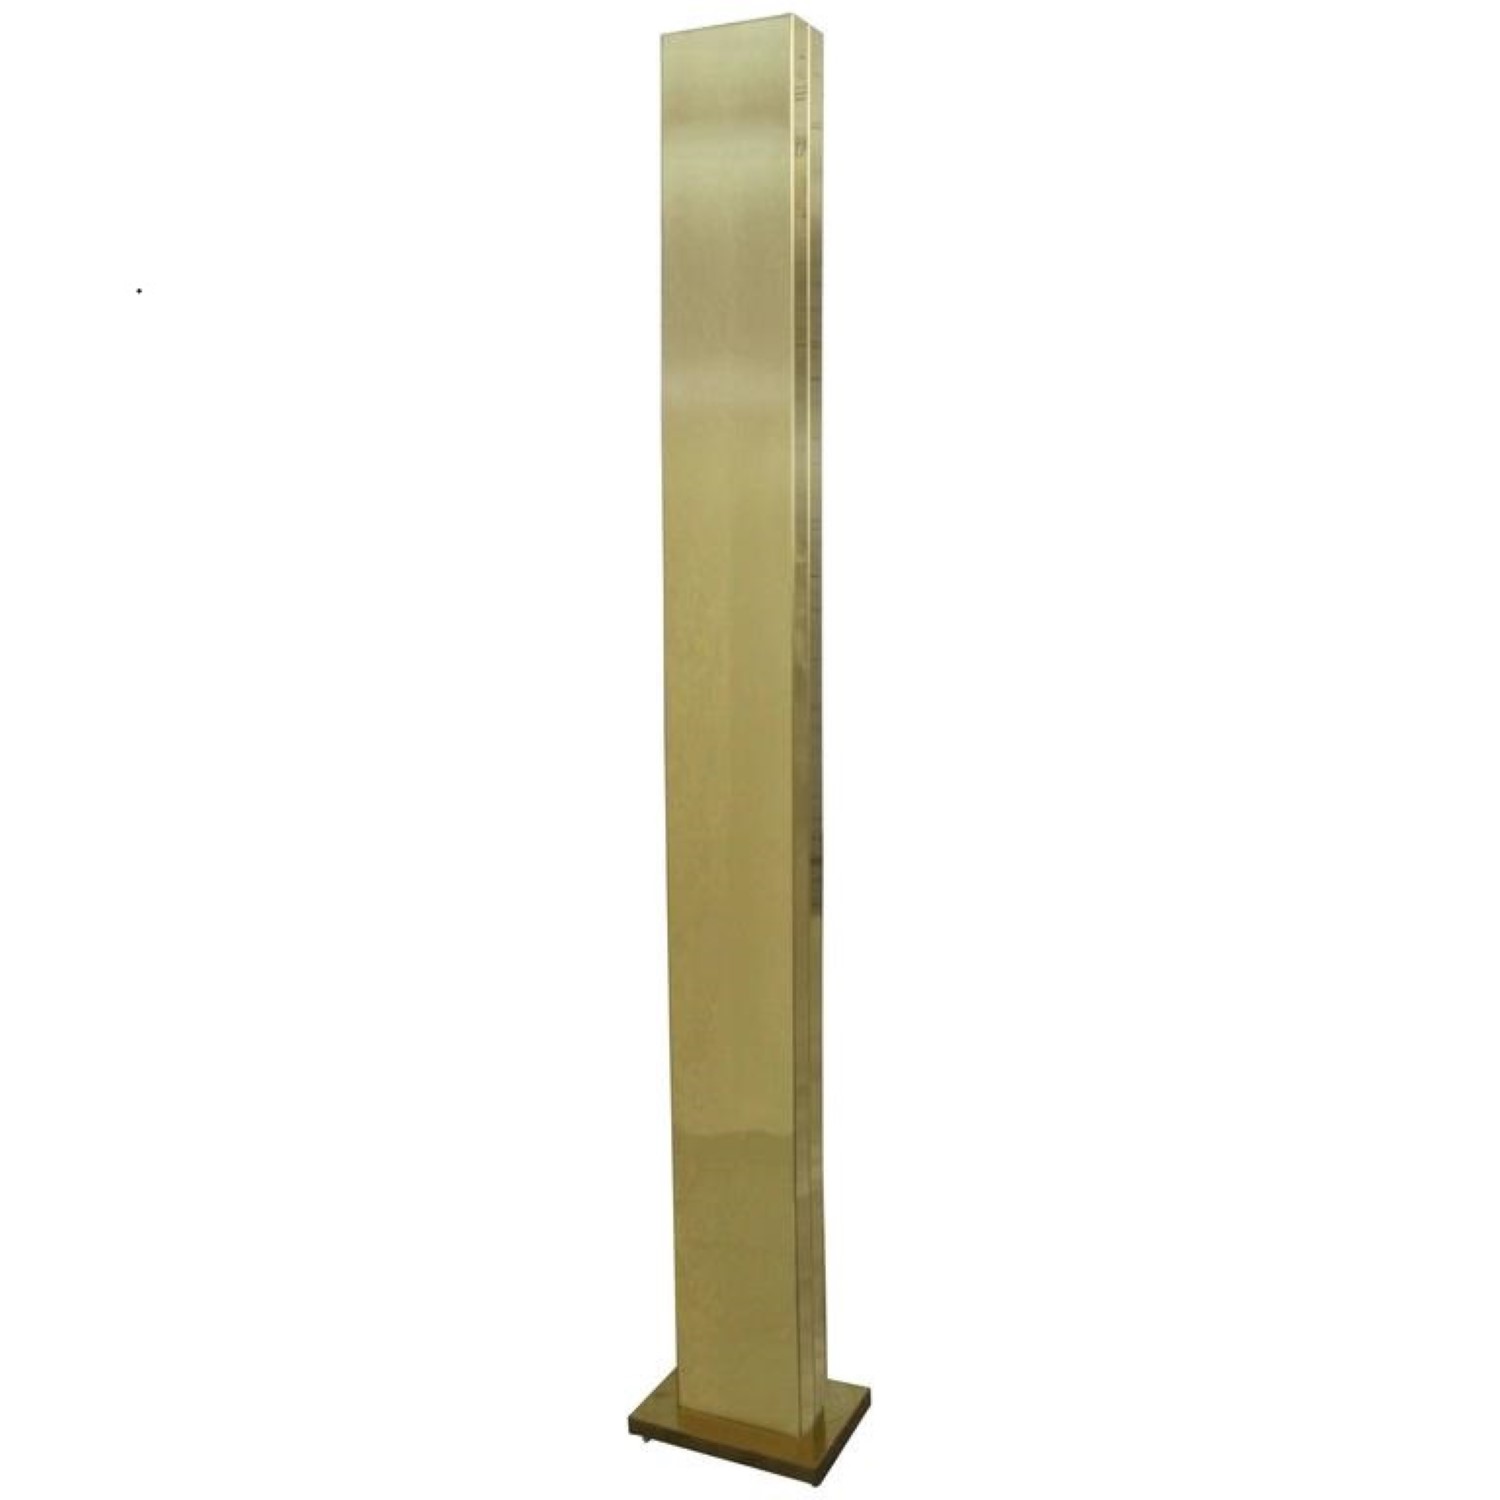 Vintage Brass Plated Monolith Skyscraper Torchiere Floor Lamp by Casella Lighting